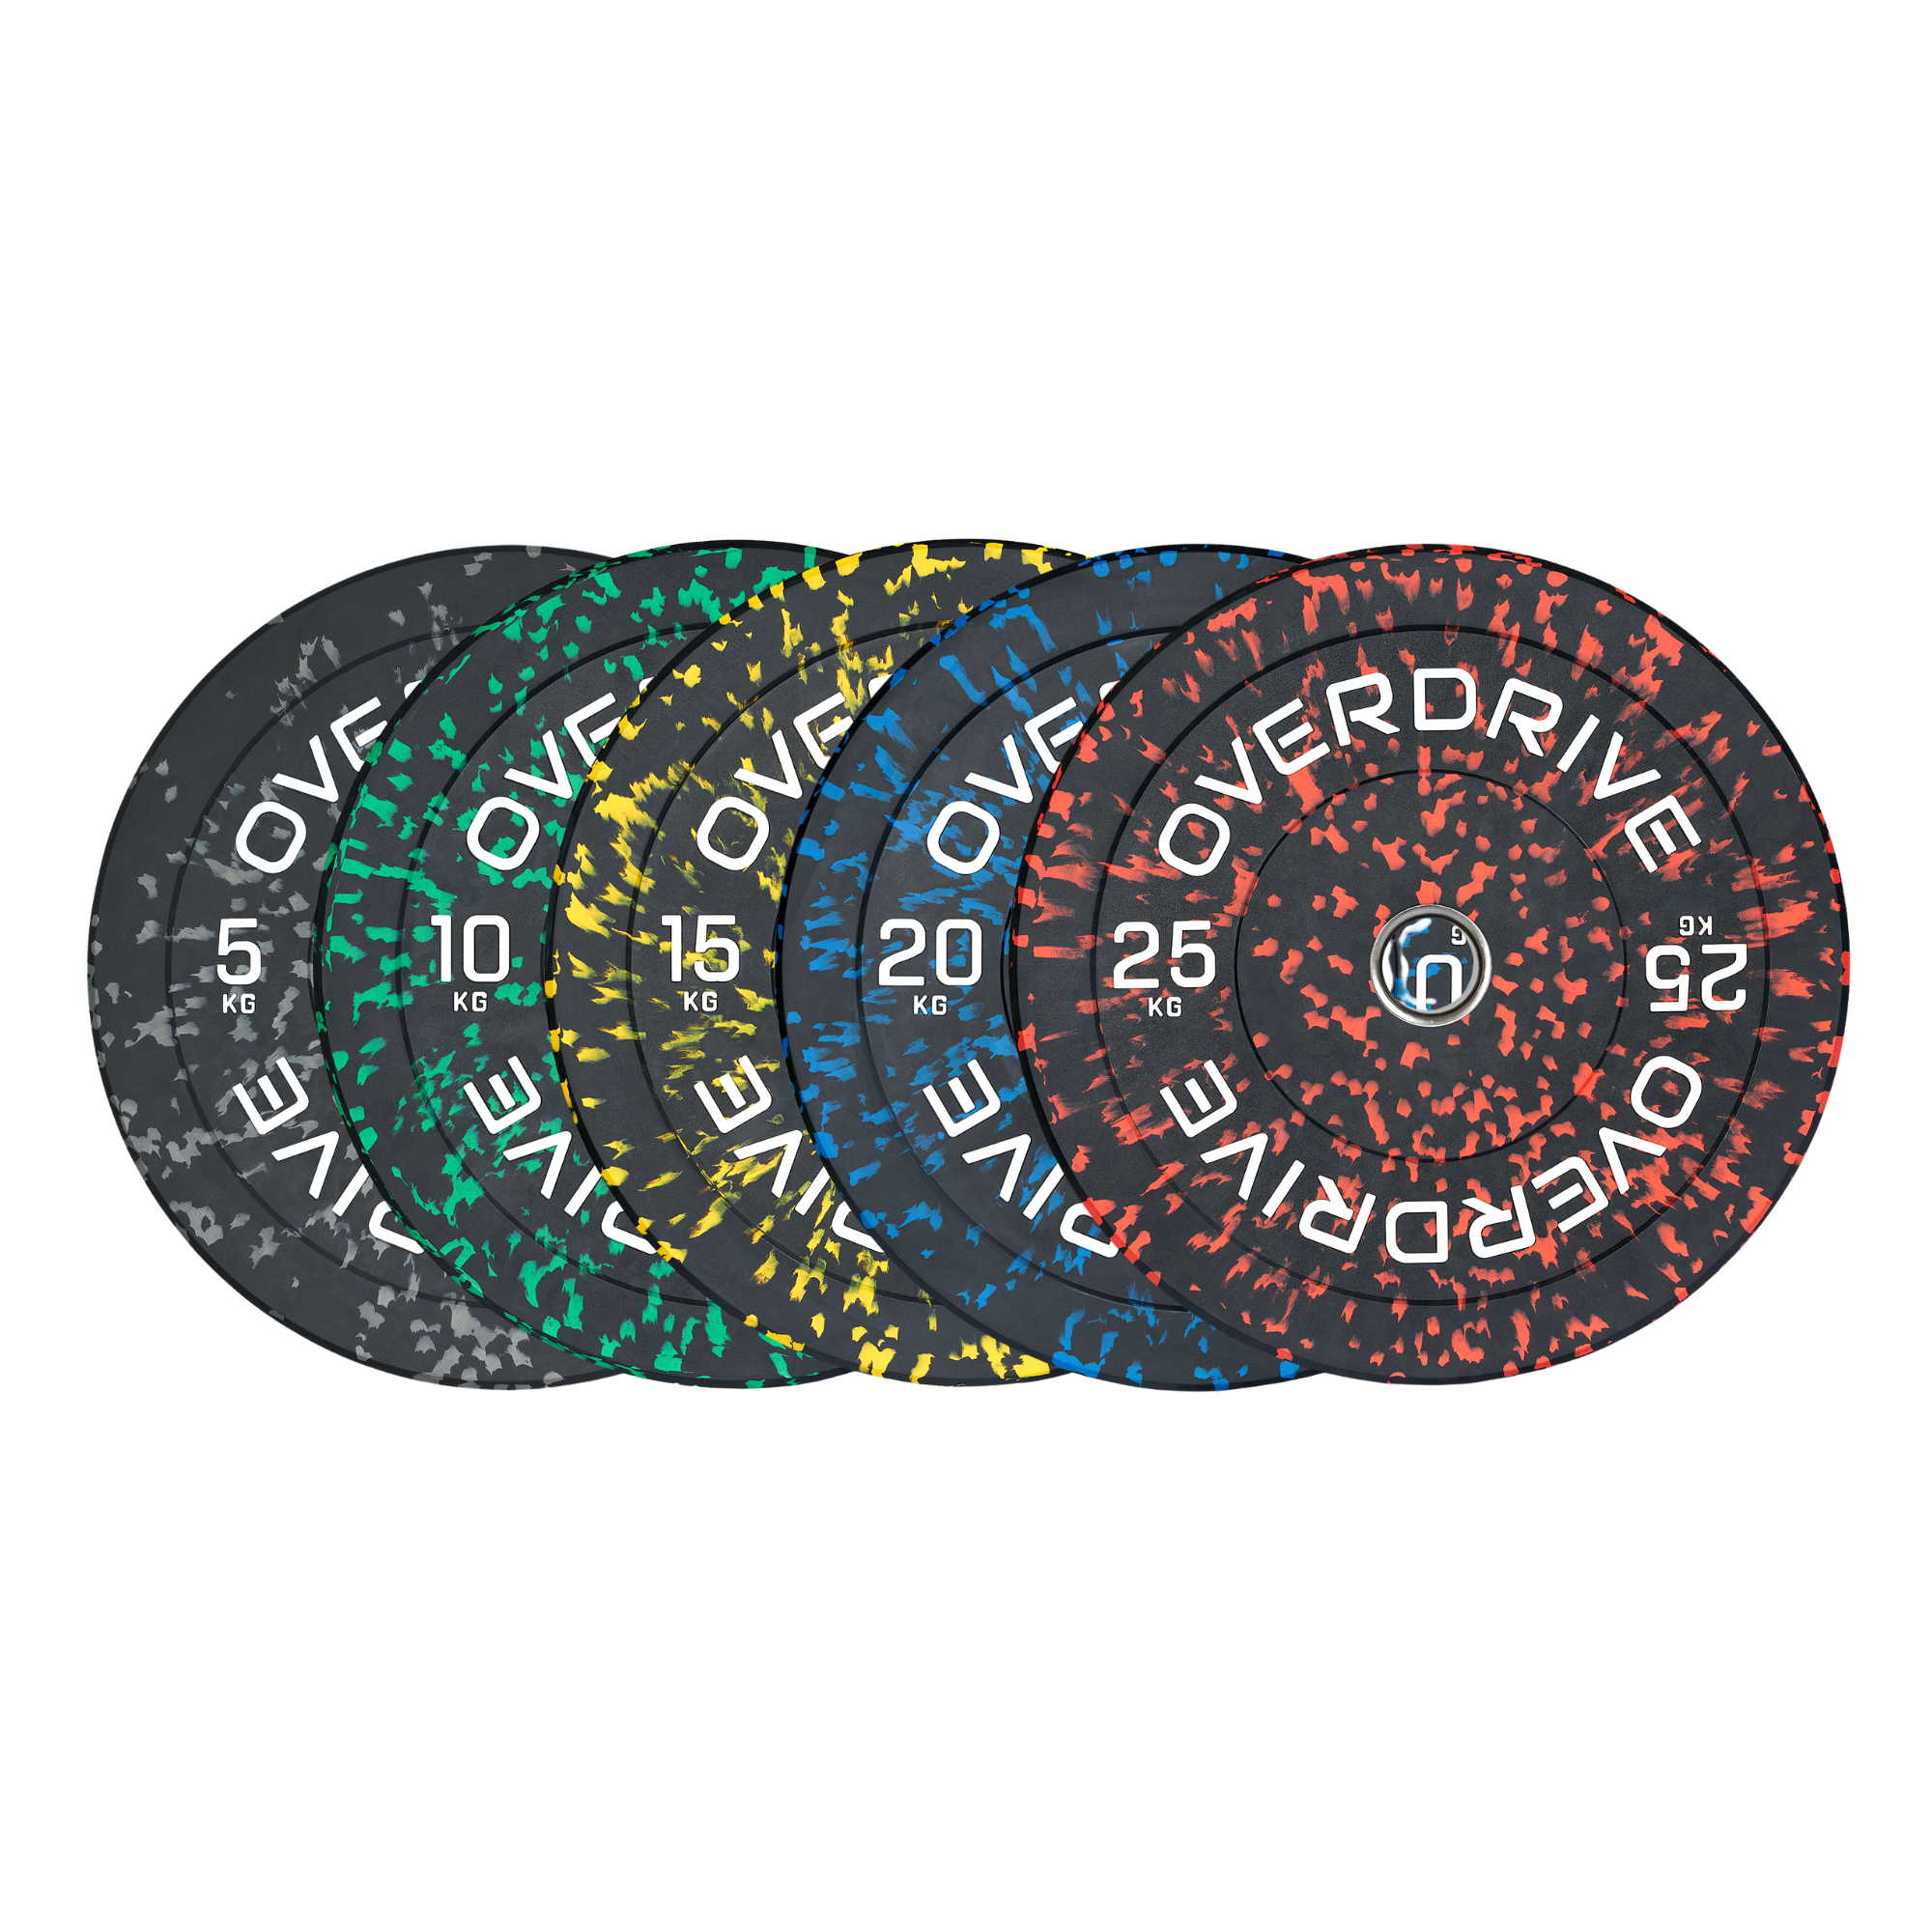 OVERDRIVE Fury Bumper Plates 100kg/150kg Weight Package